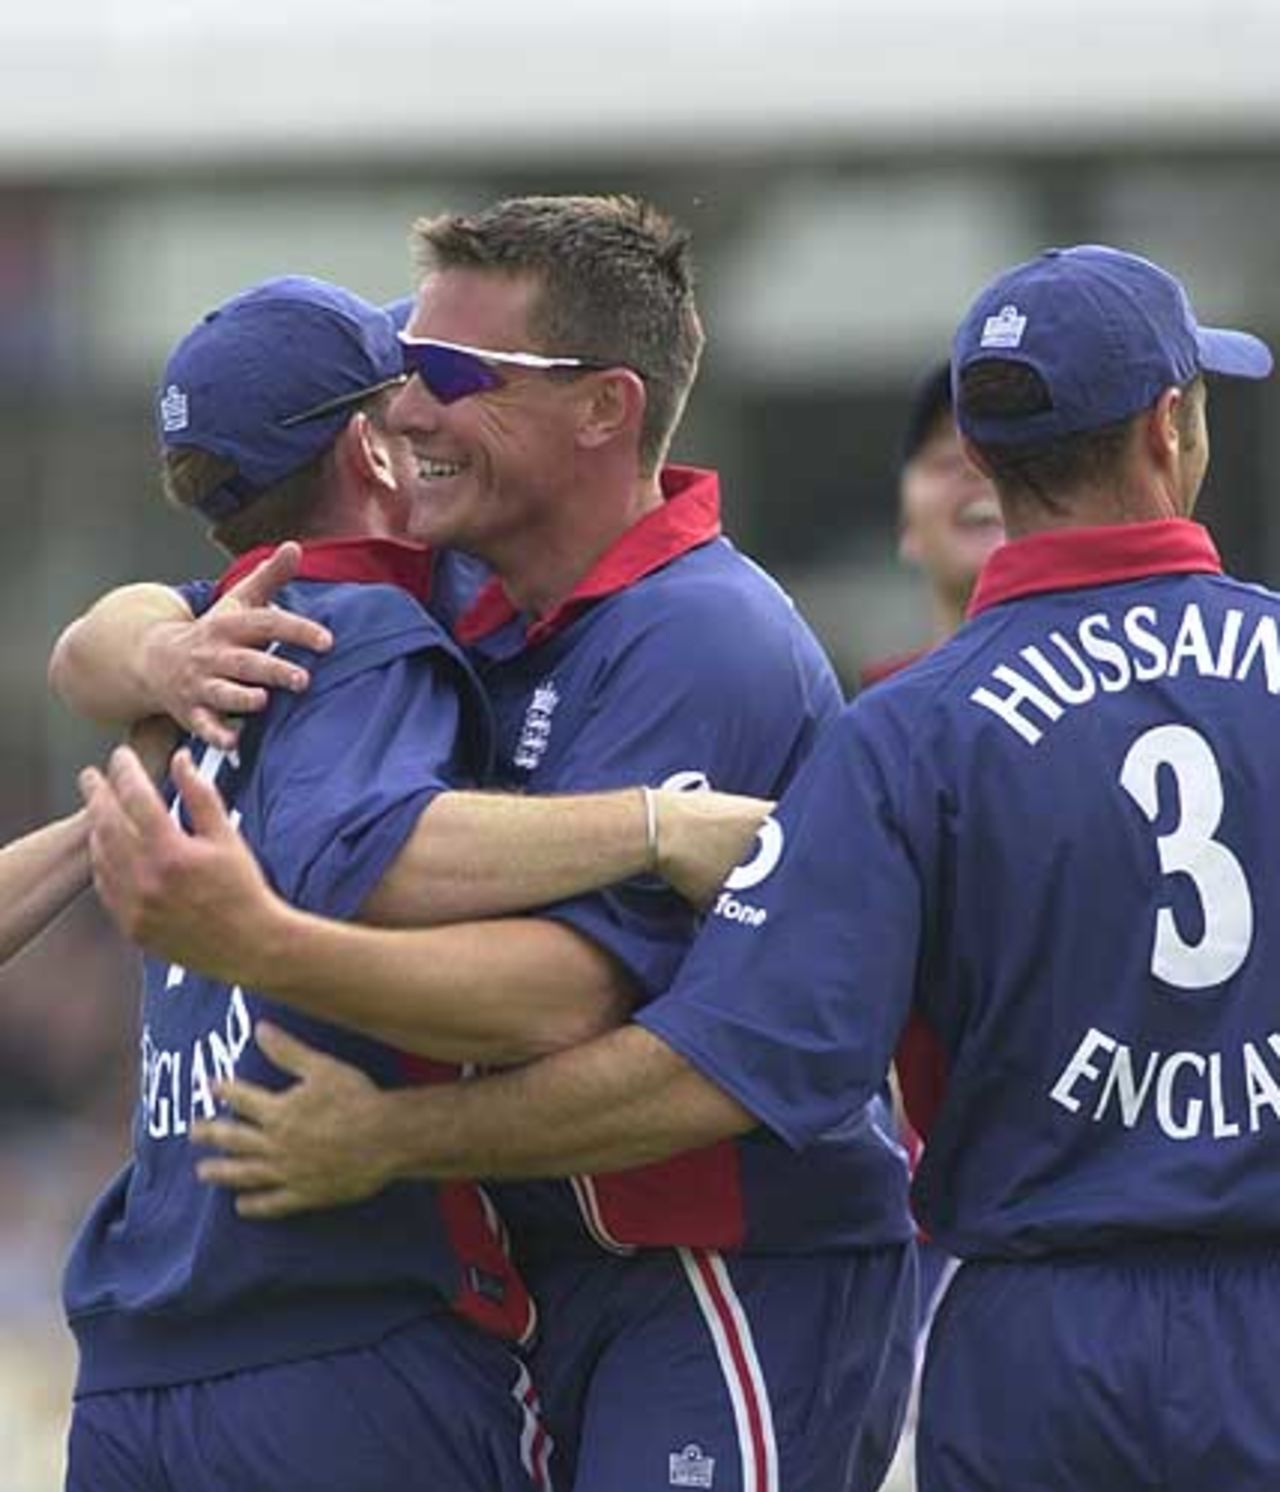 Giles and Kirtley hug after the latter has caught Ganguly on the boundary off the former, England v India, NatWest Series, Lord's, Sat 29 Jun